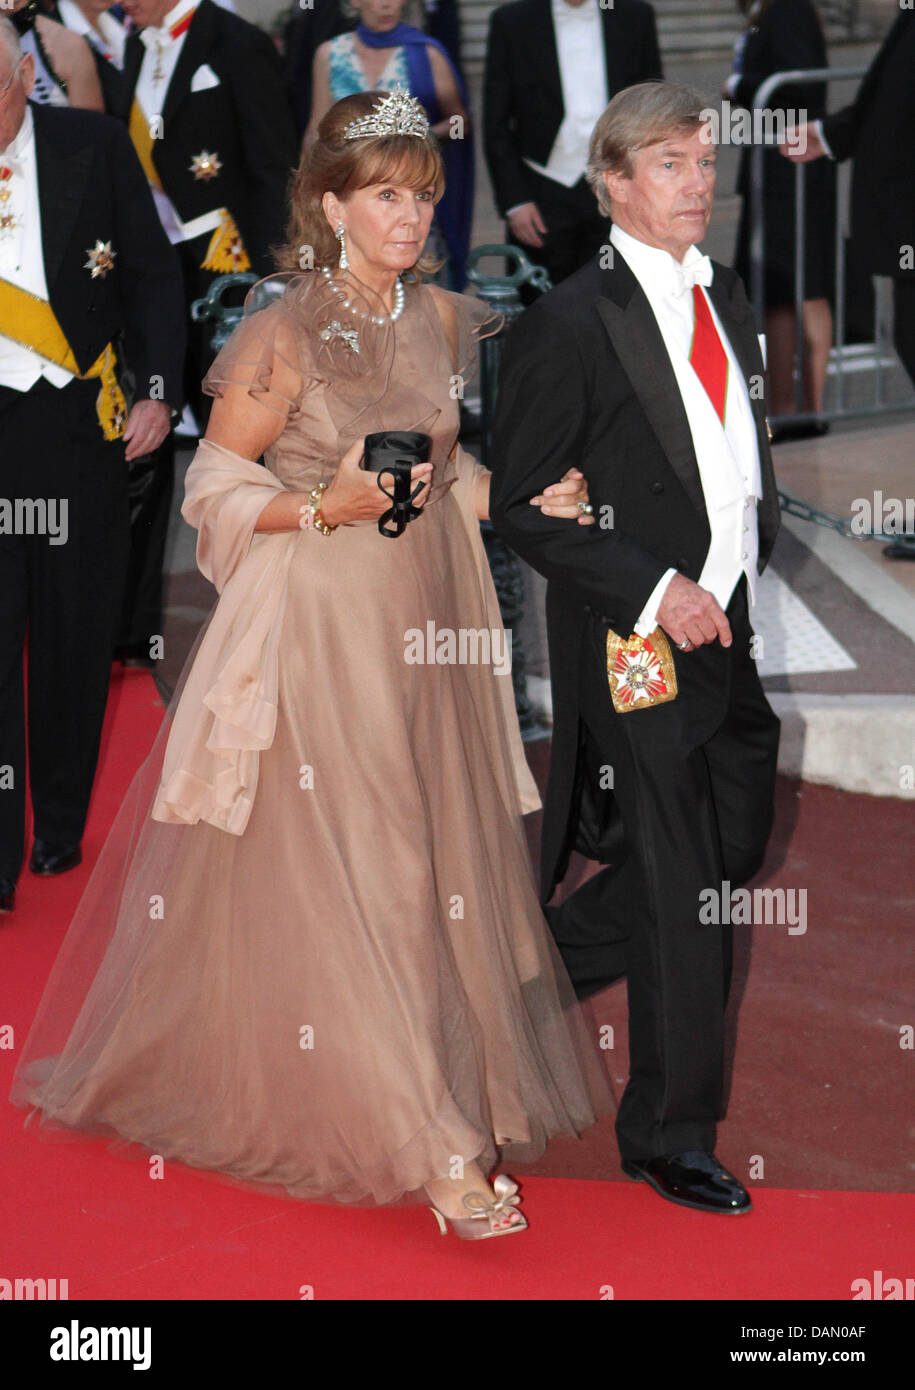 Bavarian Prince Leopold and his wife Ursula attend the official dinner ...